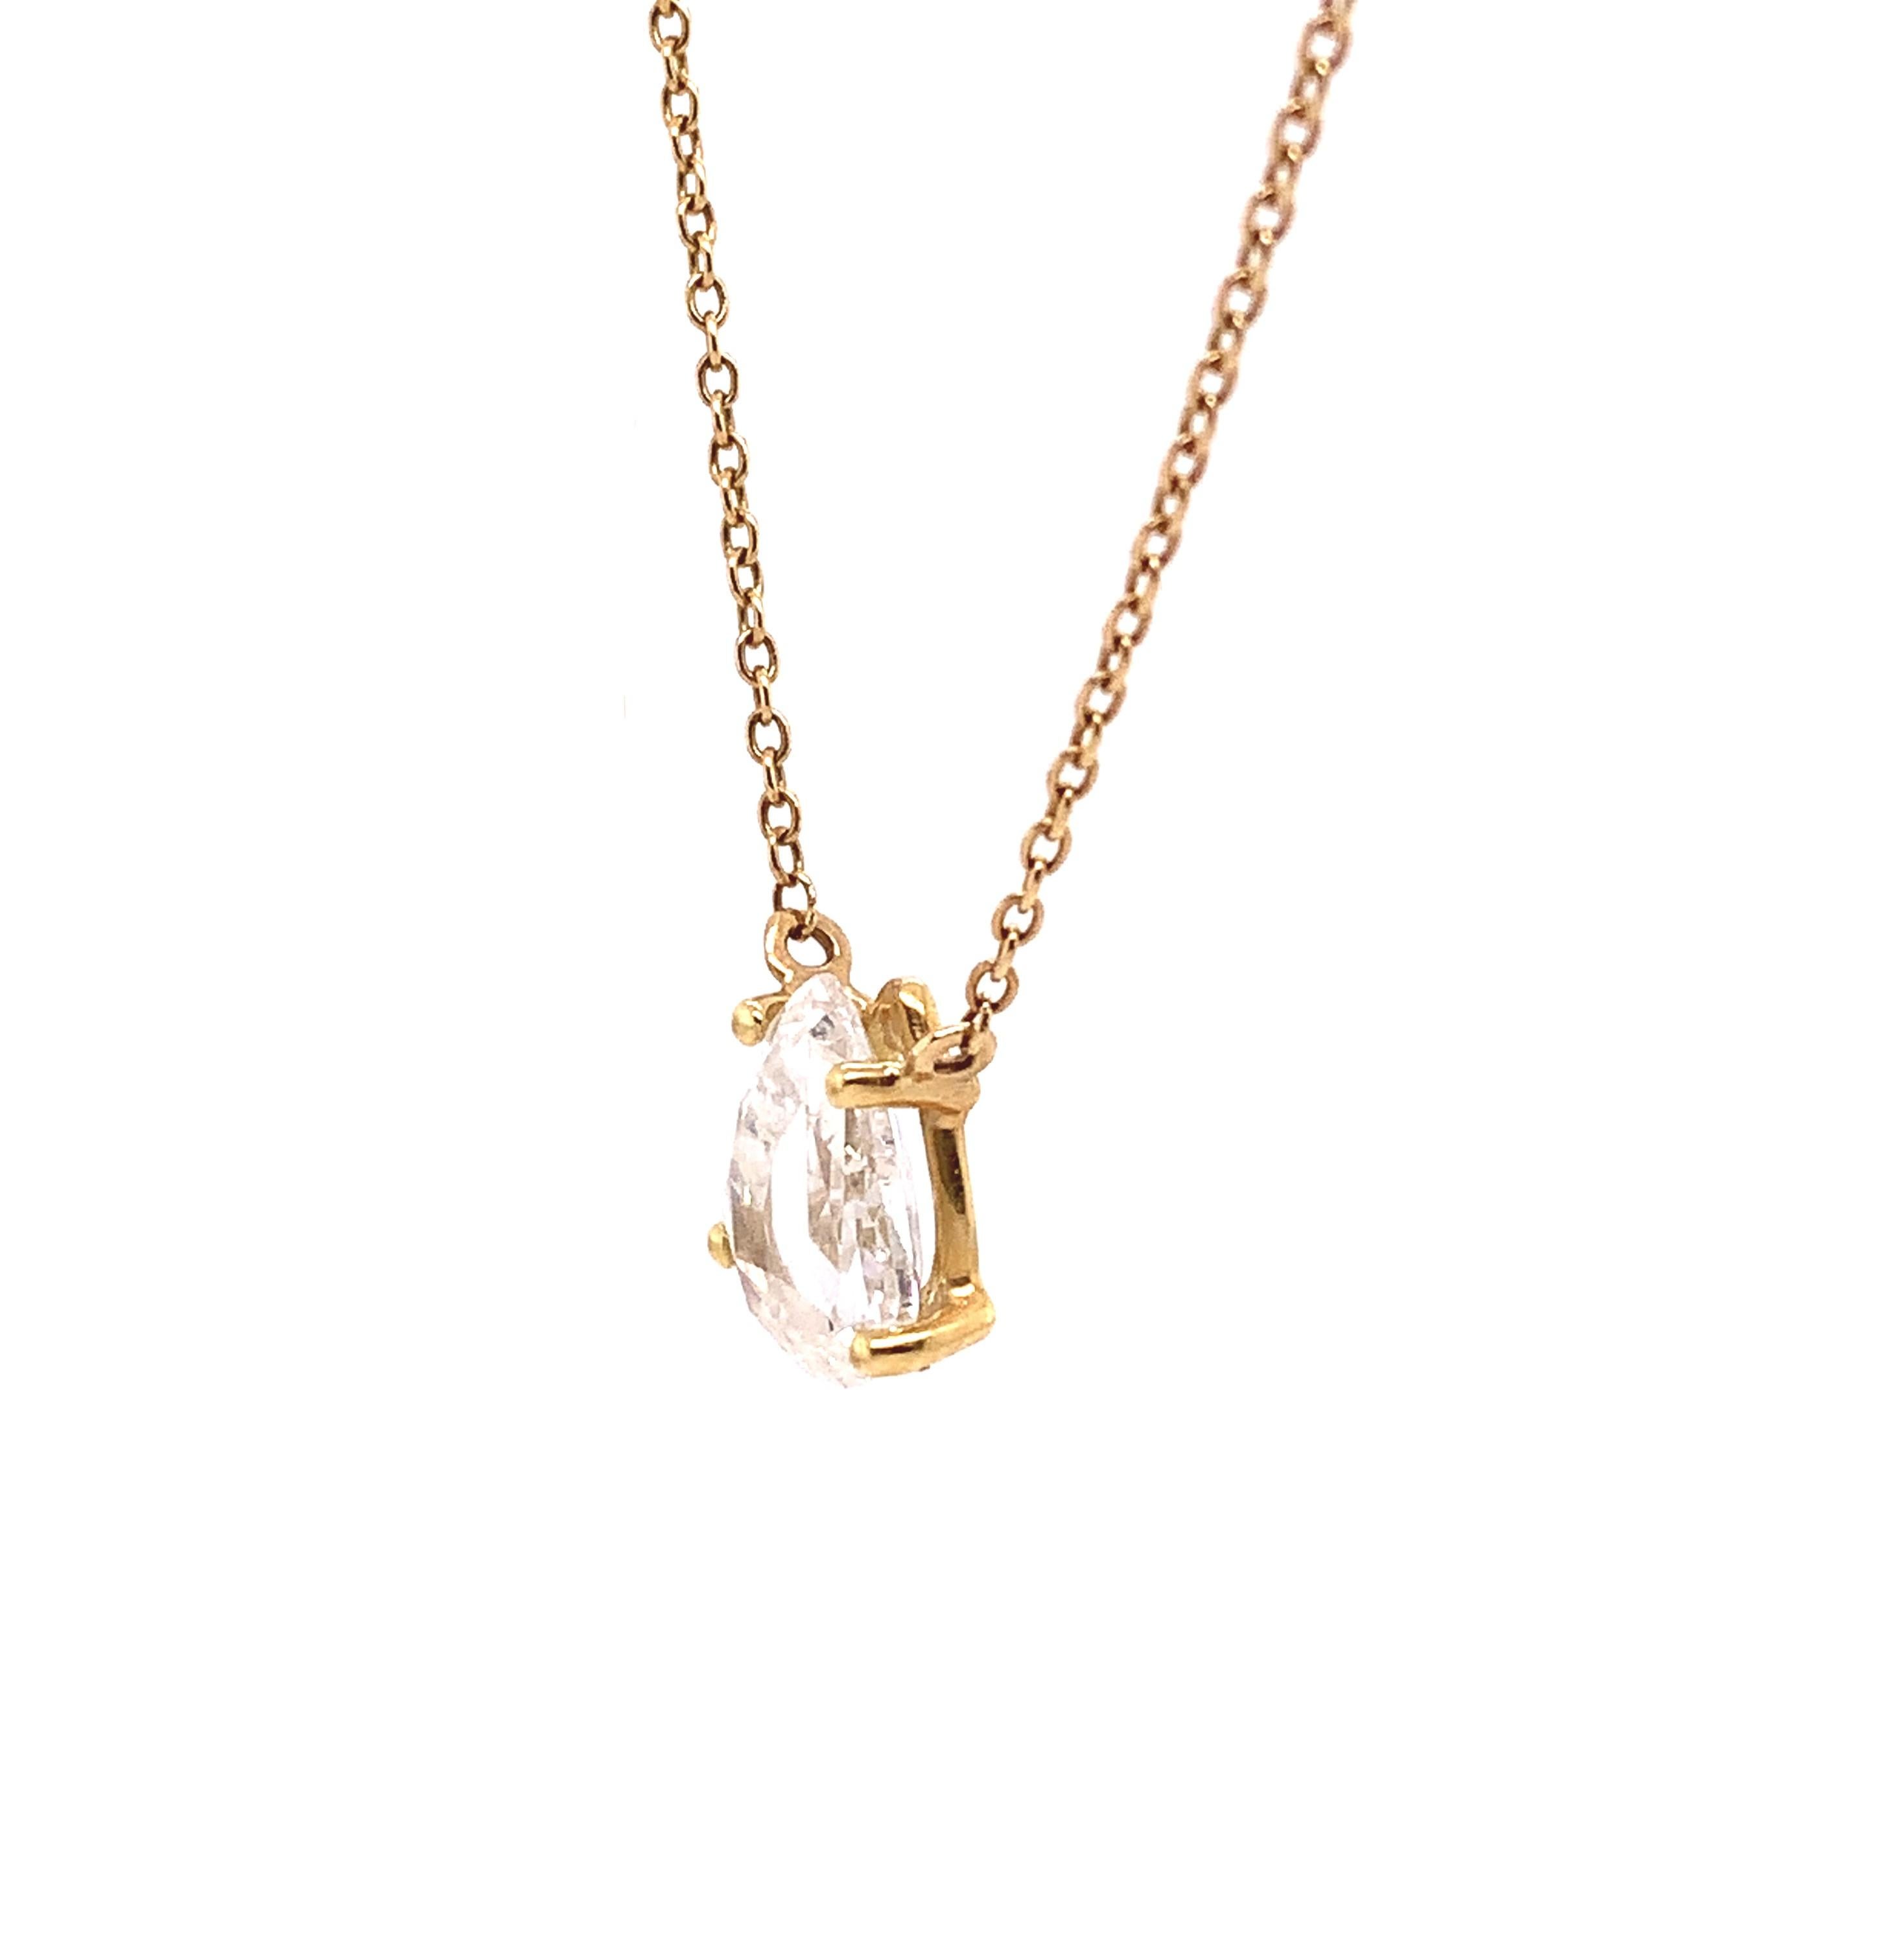 Dainty Collection

A delicate Yellow Gold necklace exuding elegance and refined simplicity with the magnificent beauty of a 1.27 carat Rose Cut Diamond.